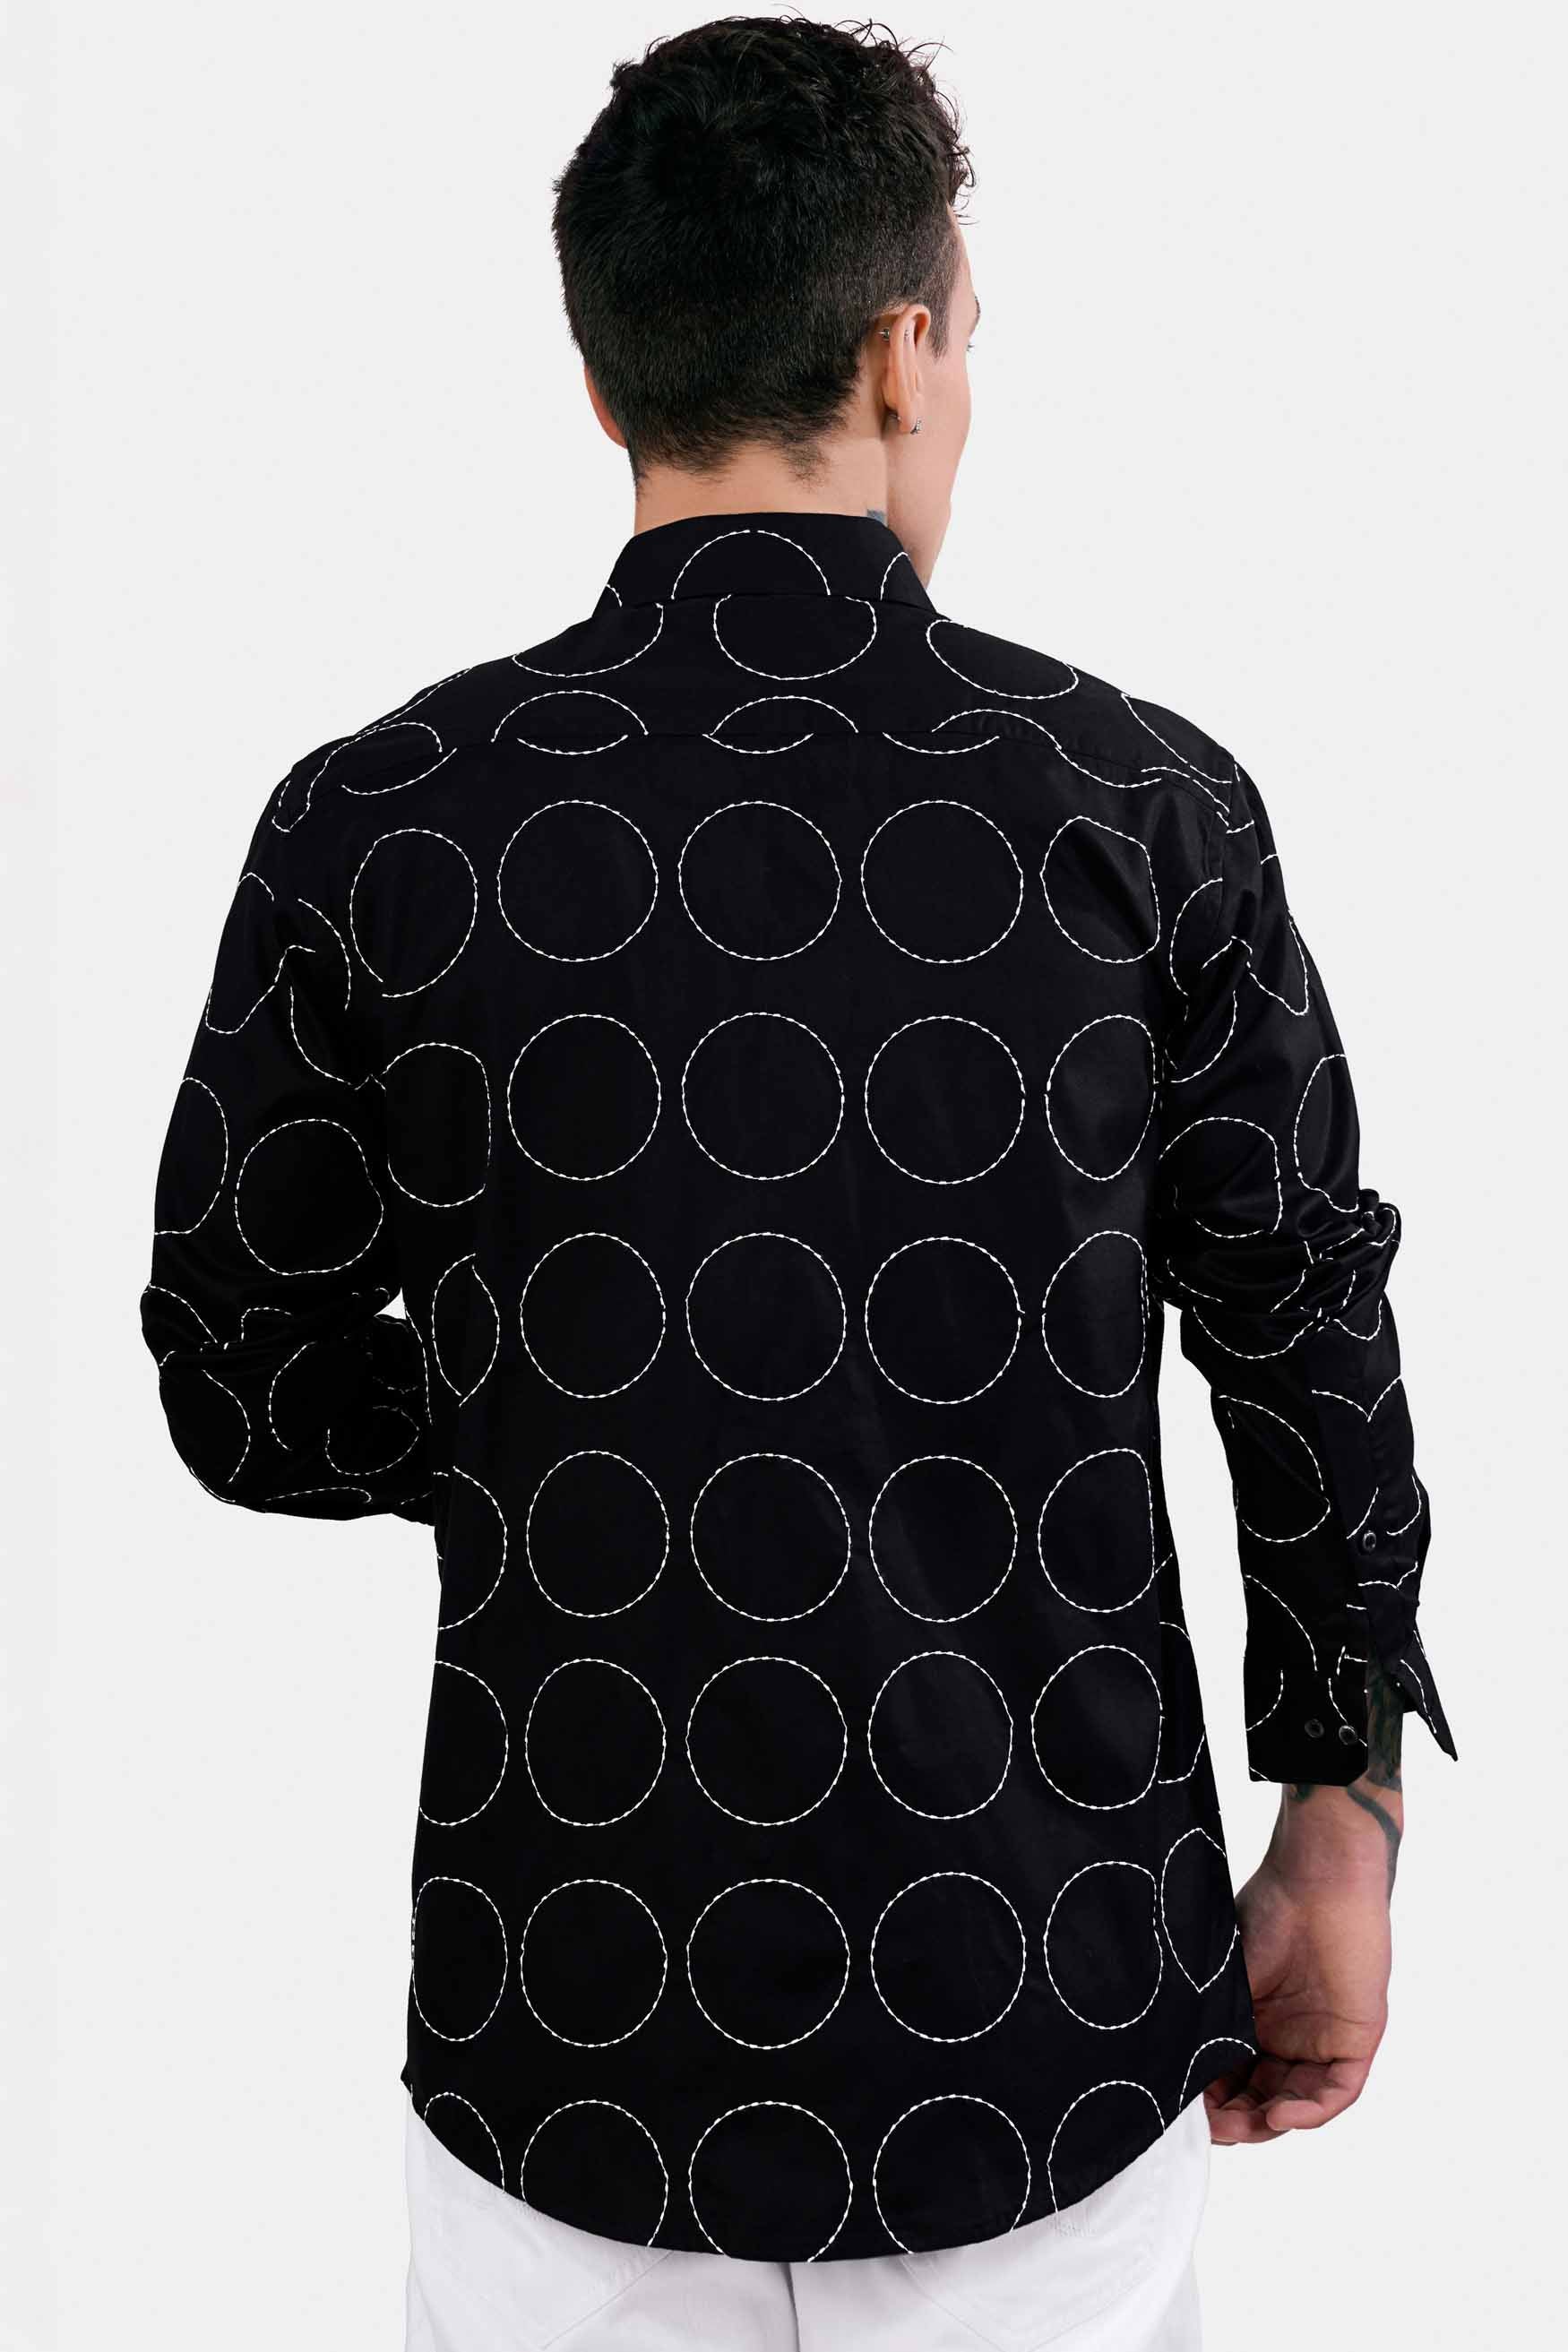 Jade Black and White Circles Embroidered Textured Luxurious linen Designer Shirt